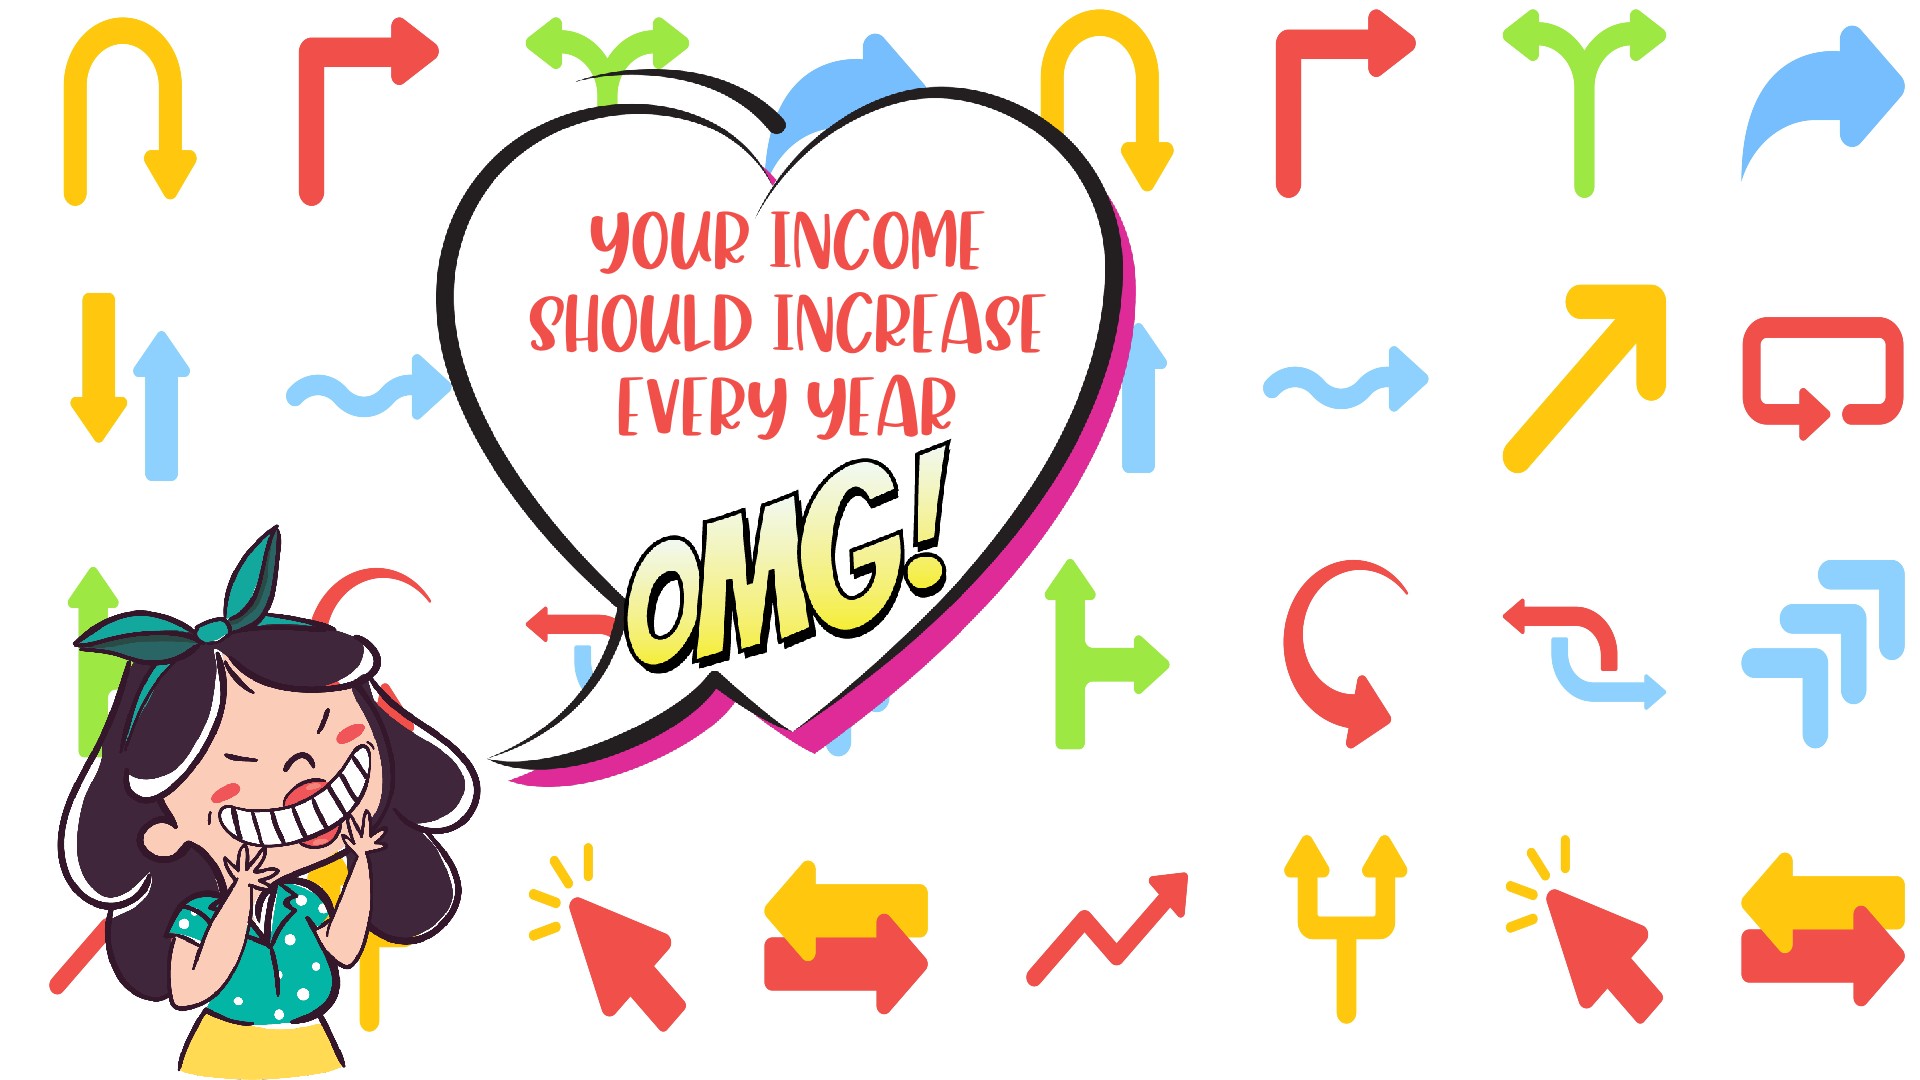 Your Income Should Increase Every Year